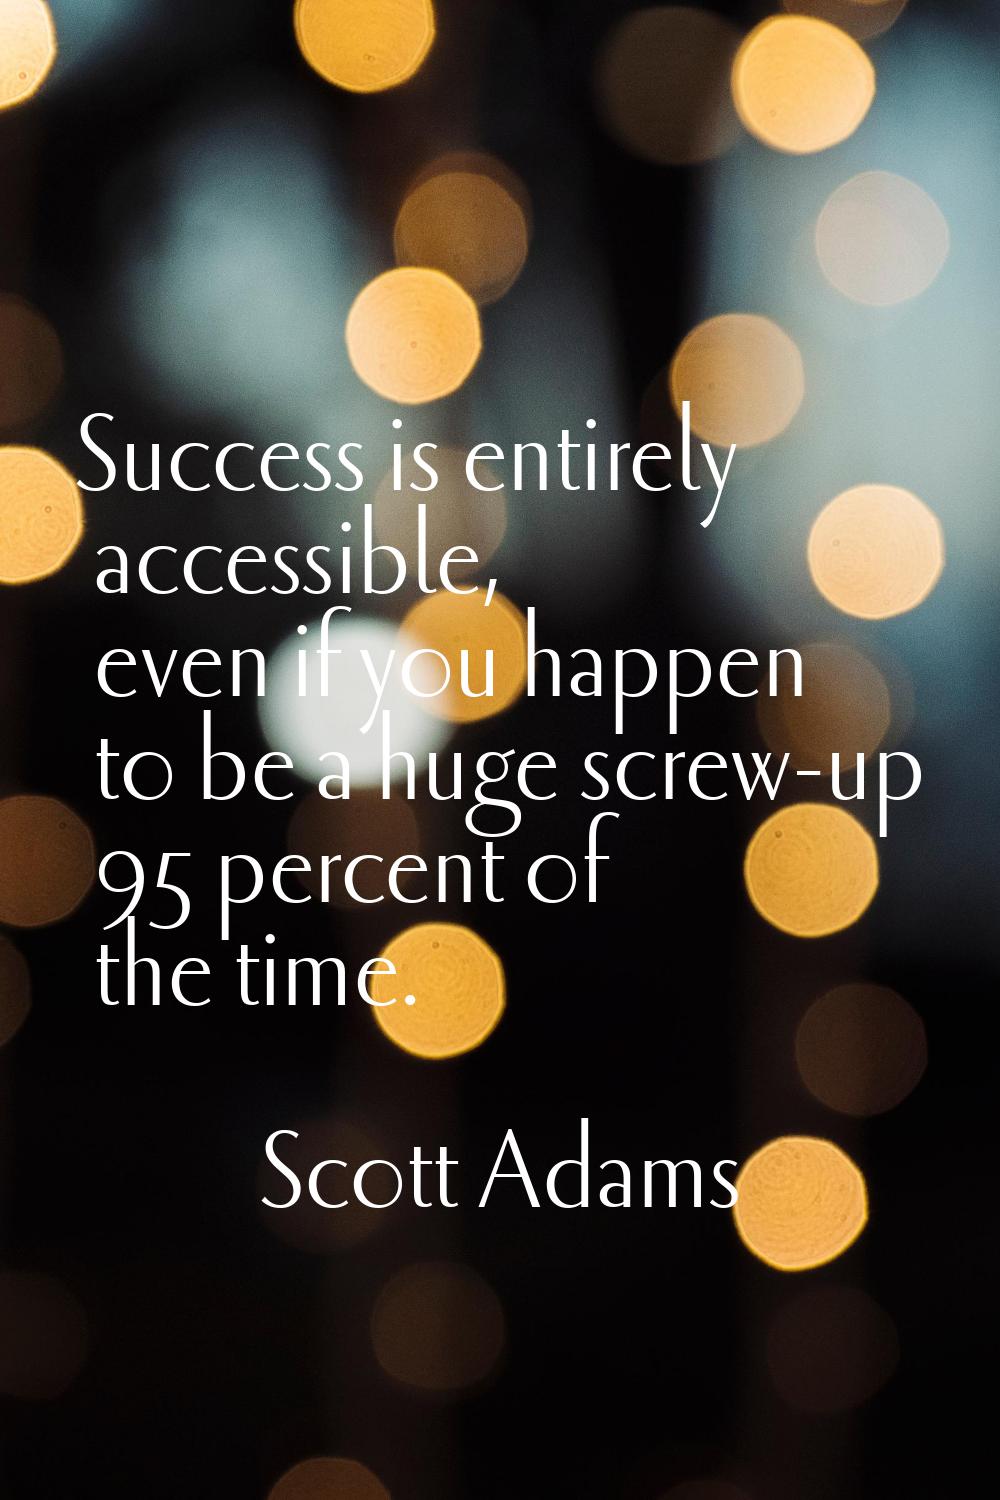 Success is entirely accessible, even if you happen to be a huge screw-up 95 percent of the time.